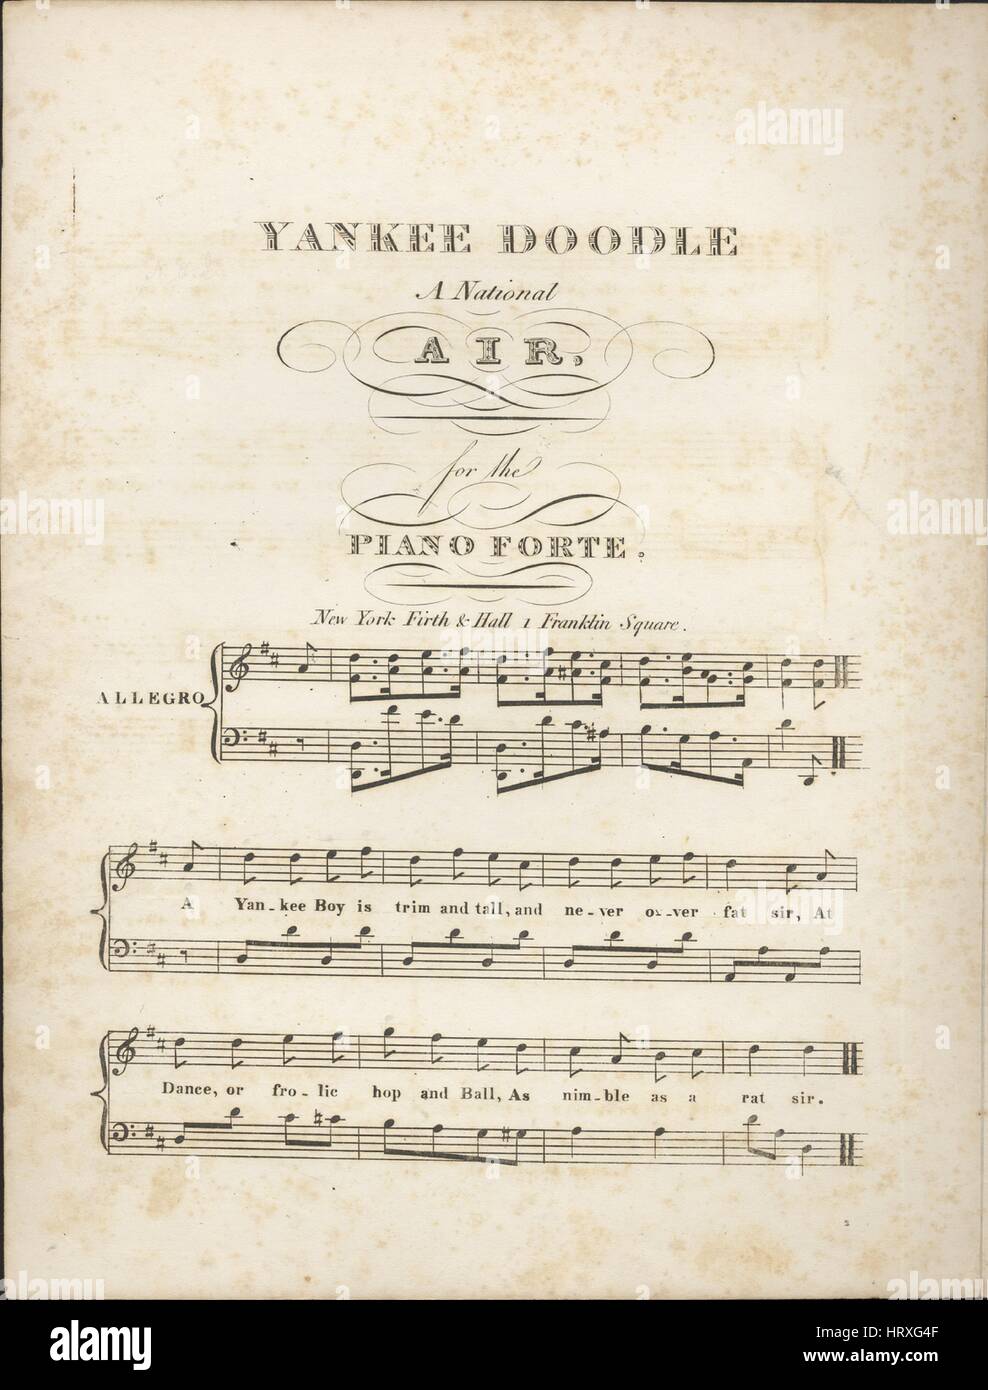 Sheet Music Cover Image Of The Song Yankee Doodle A National Air With Original Authorship Notes Reading Na United States 1900 The Publisher Is Listed As Firth And Hall 1 Franklin Square